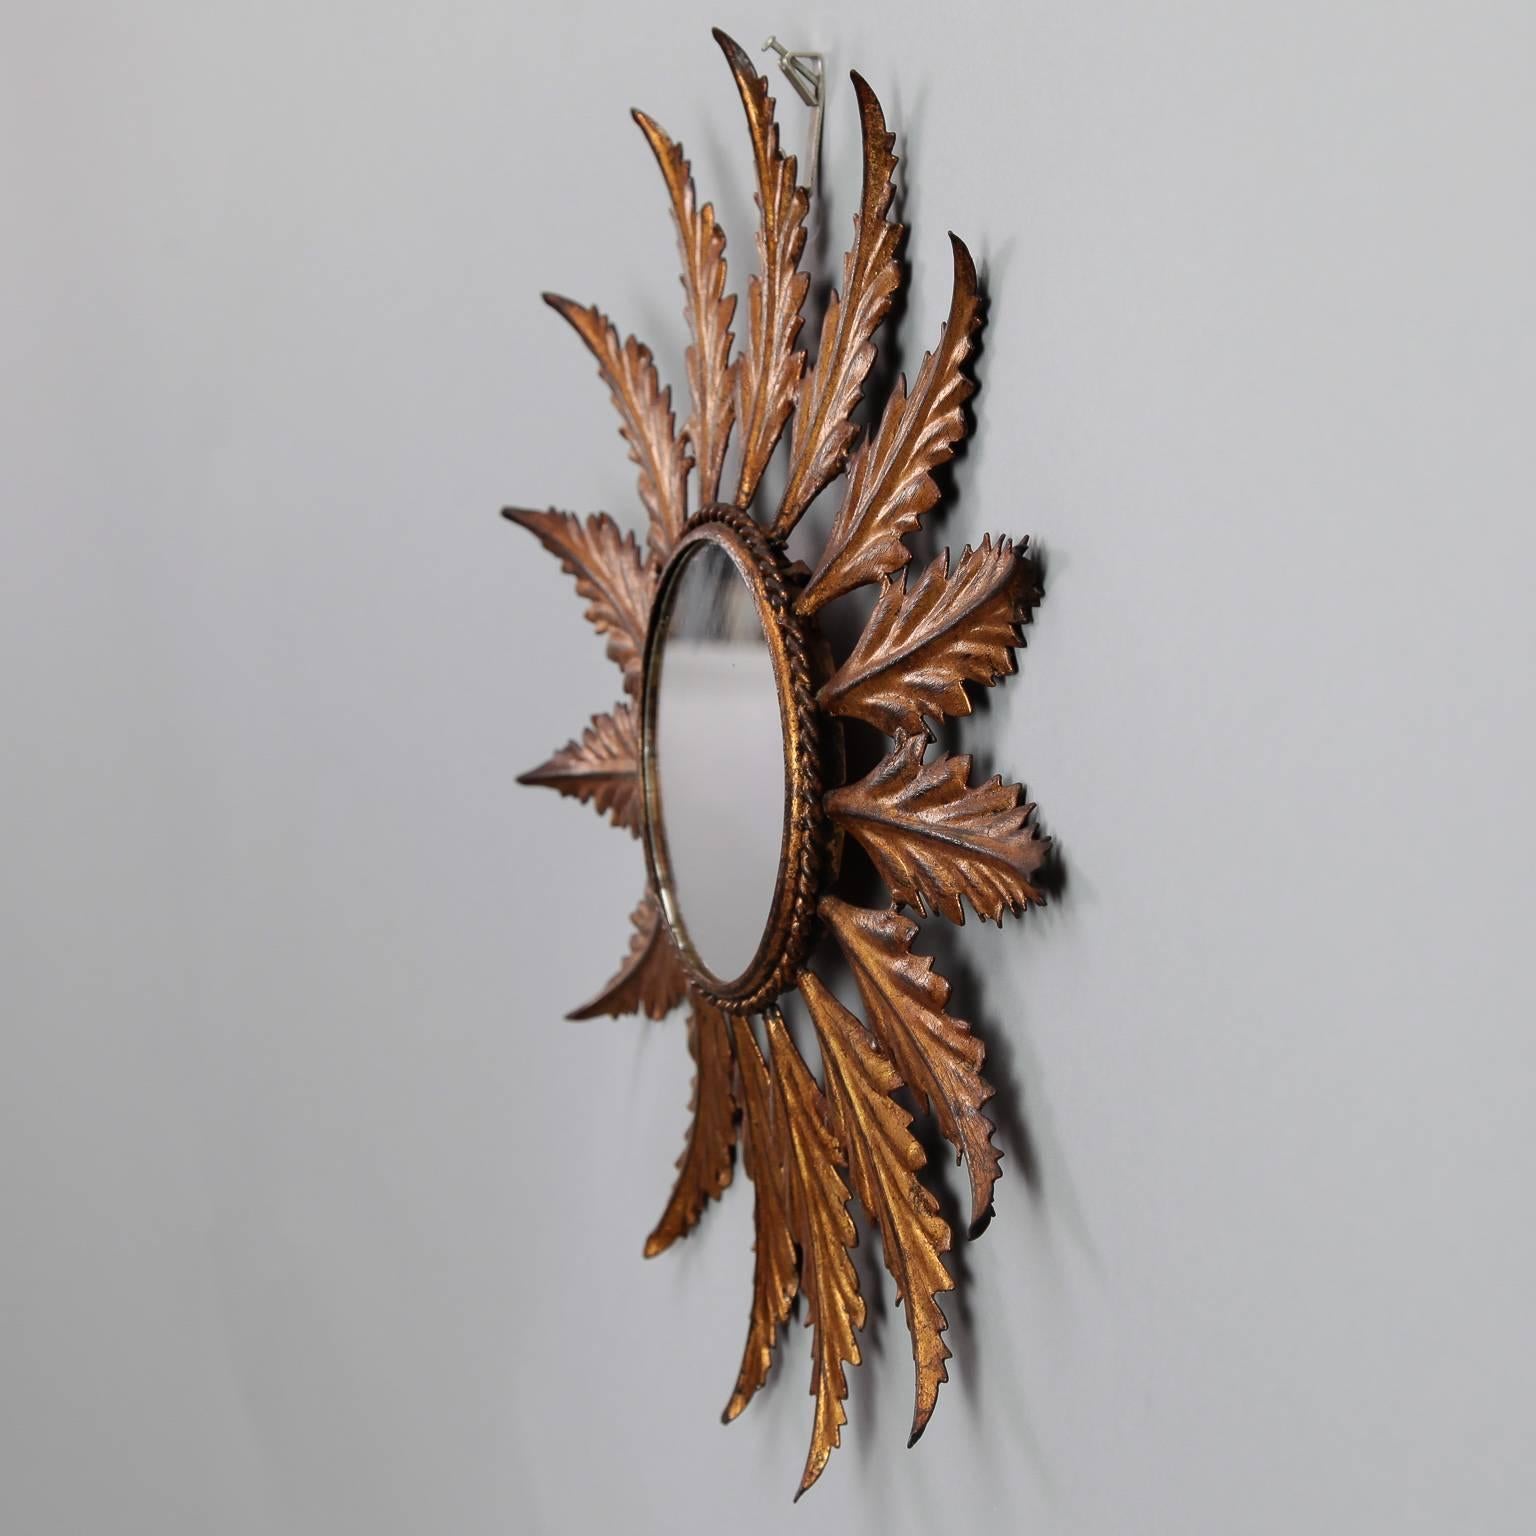 At just over 14” in diameter, this circa 1950s Italian sunburst mirror has a gilt metal frame with leaf-form rays and a twisted inner rim.